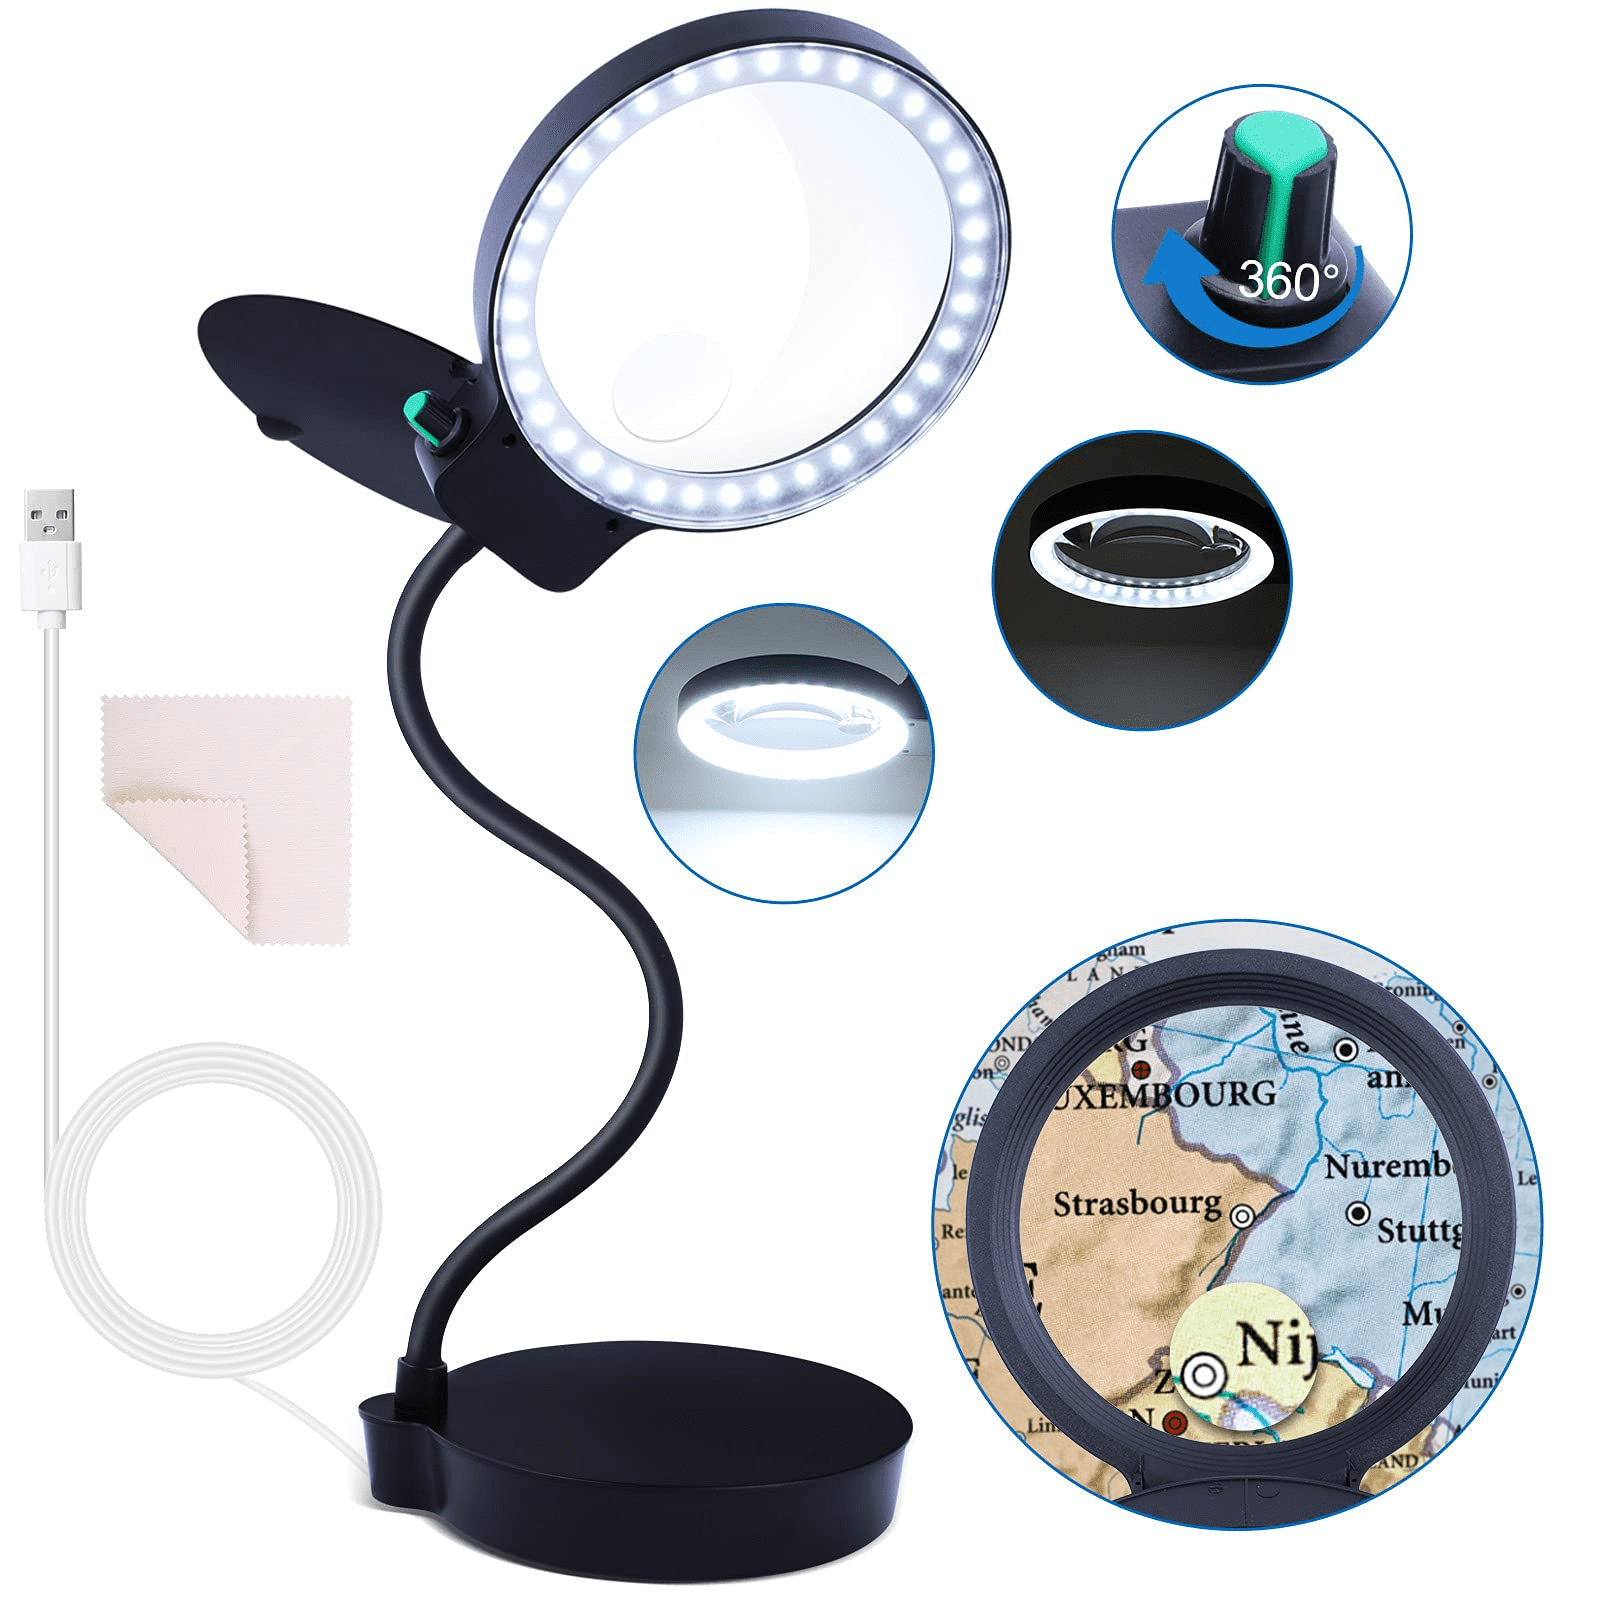 Tom-shine Magnifying Glass Lamp 3X 10X,Stepless Dimmable LED Magnifying  Lamp with Dust Cover Metal Clamp,Adjustable LED Magnifier with Light and  Stand